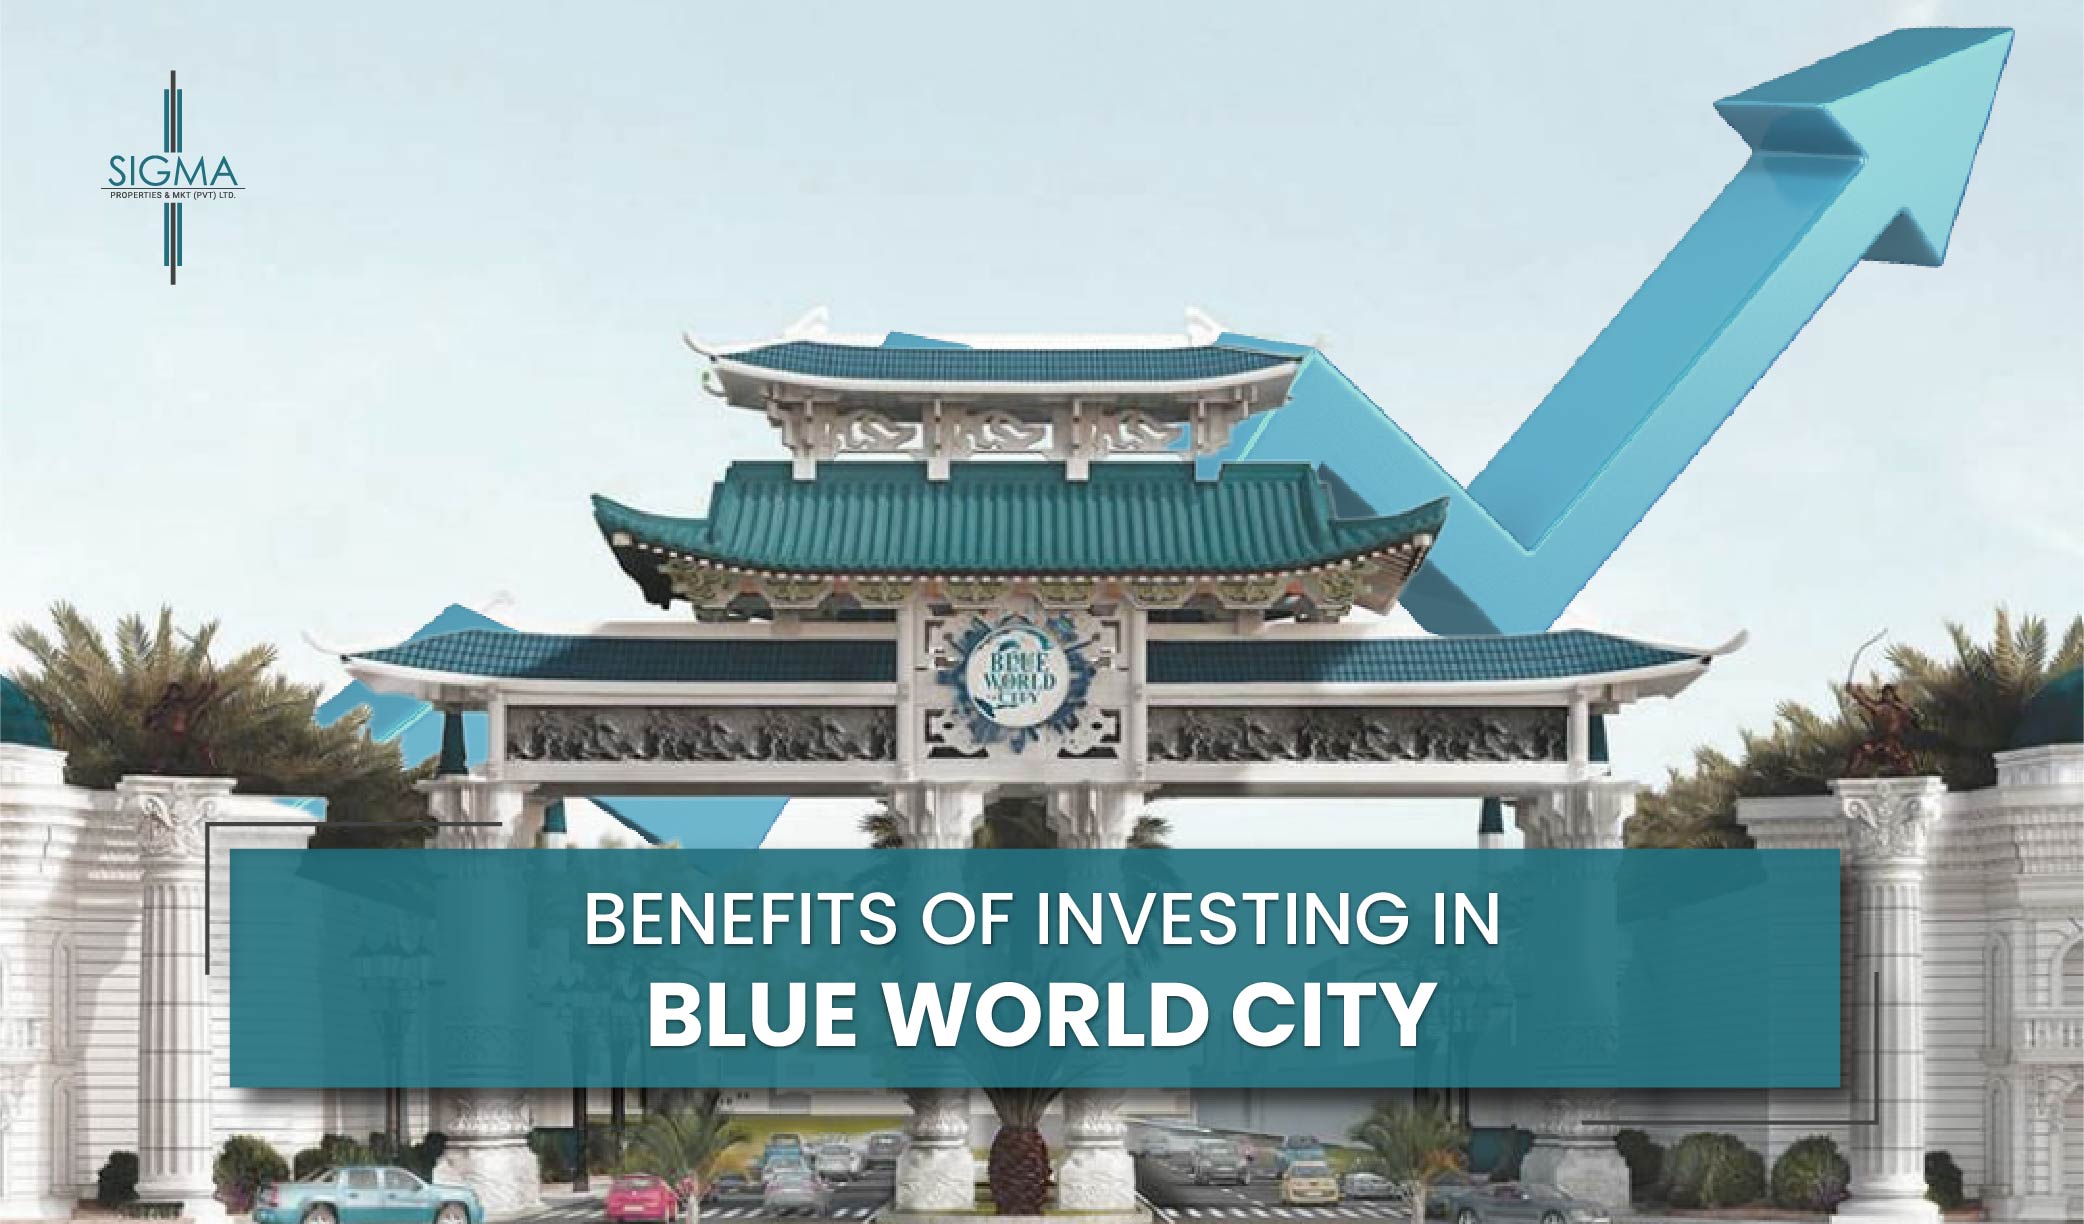 Benefits of investing in BWC